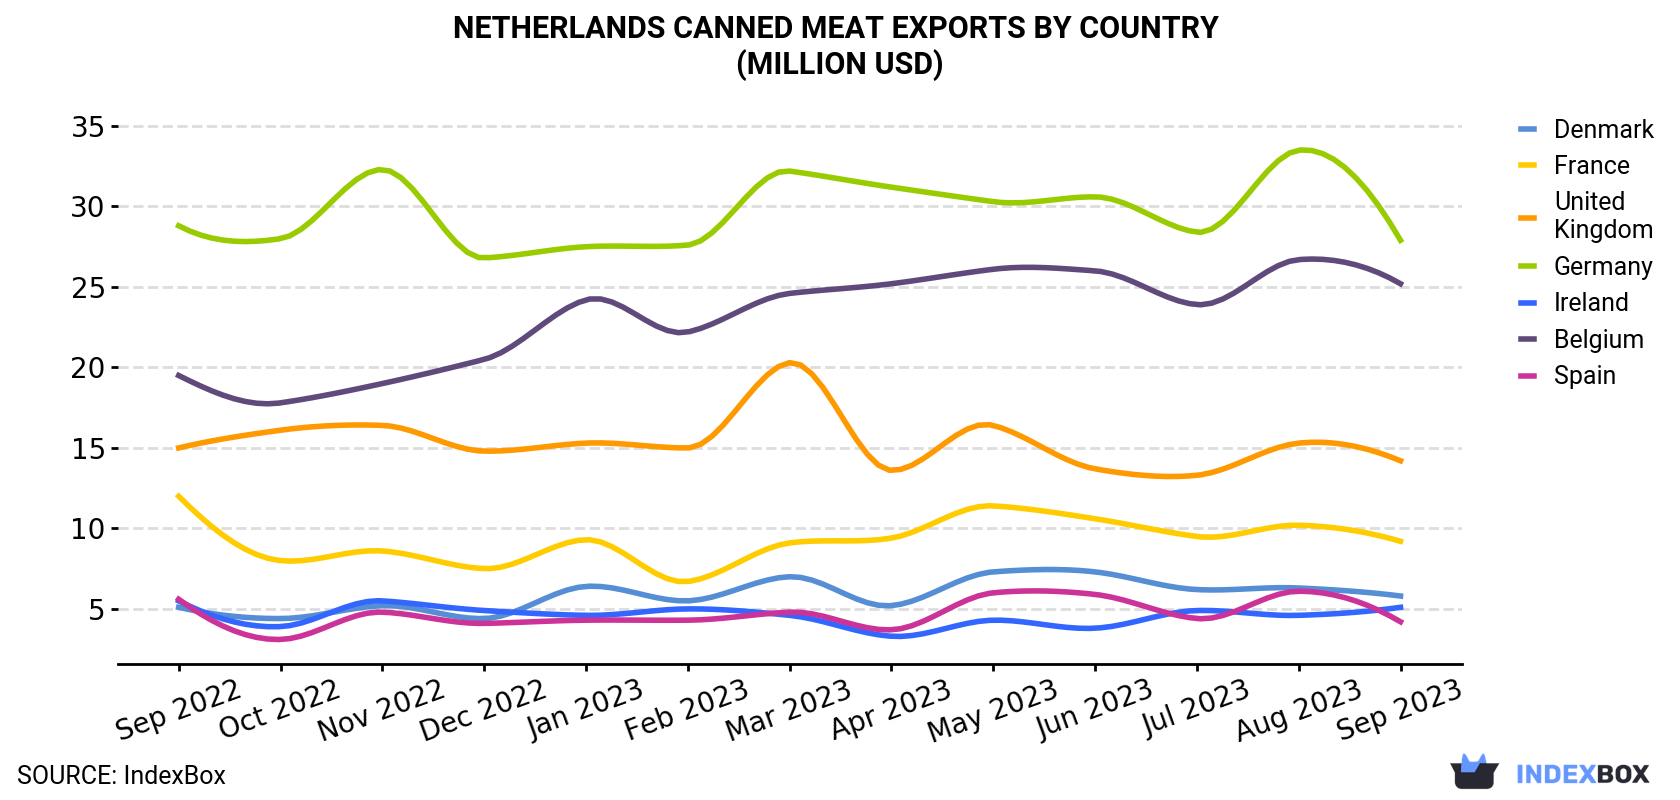 Netherlands Canned Meat Exports By Country (Million USD)